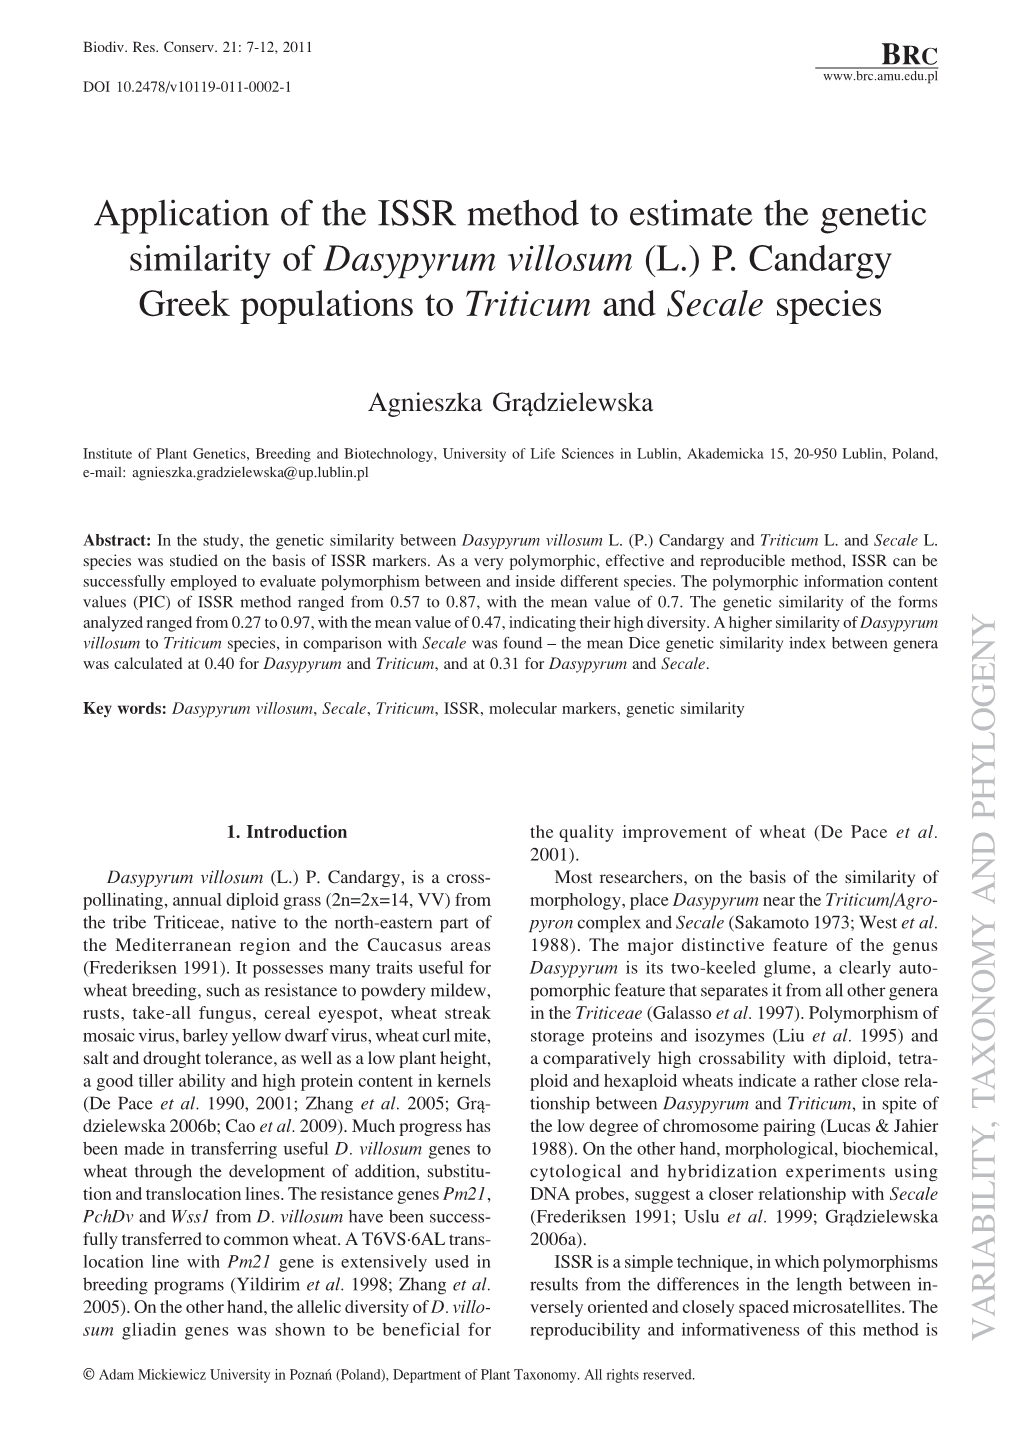 Application of the ISSR Method to Estimate the Genetic Similarity of Dasypyrum Villosum (L.) P